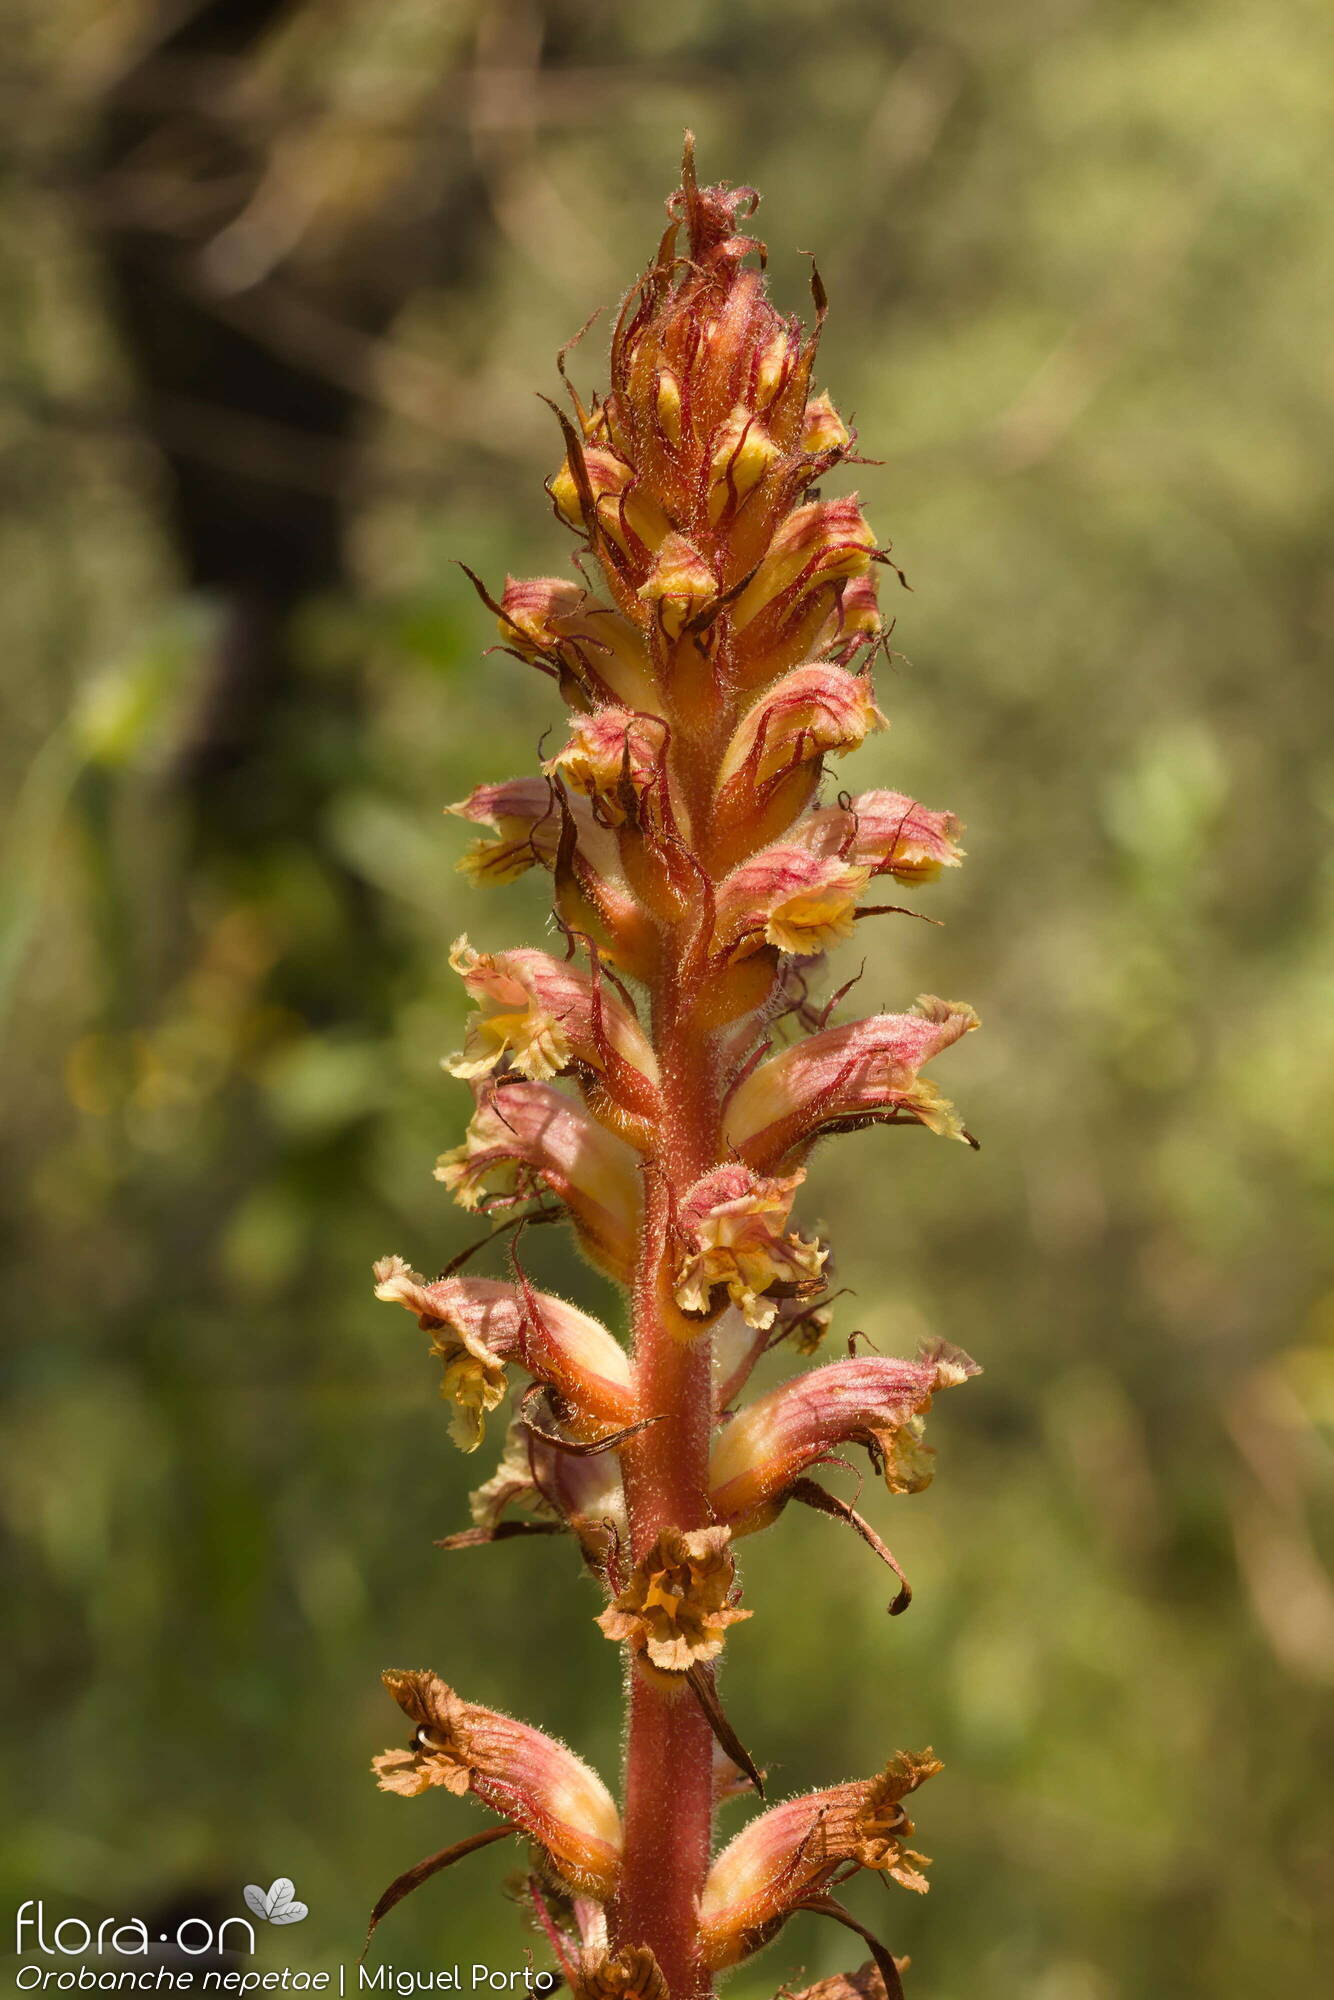 Orobanche nepetae - Flor (geral) | Miguel Porto; CC BY-NC 4.0